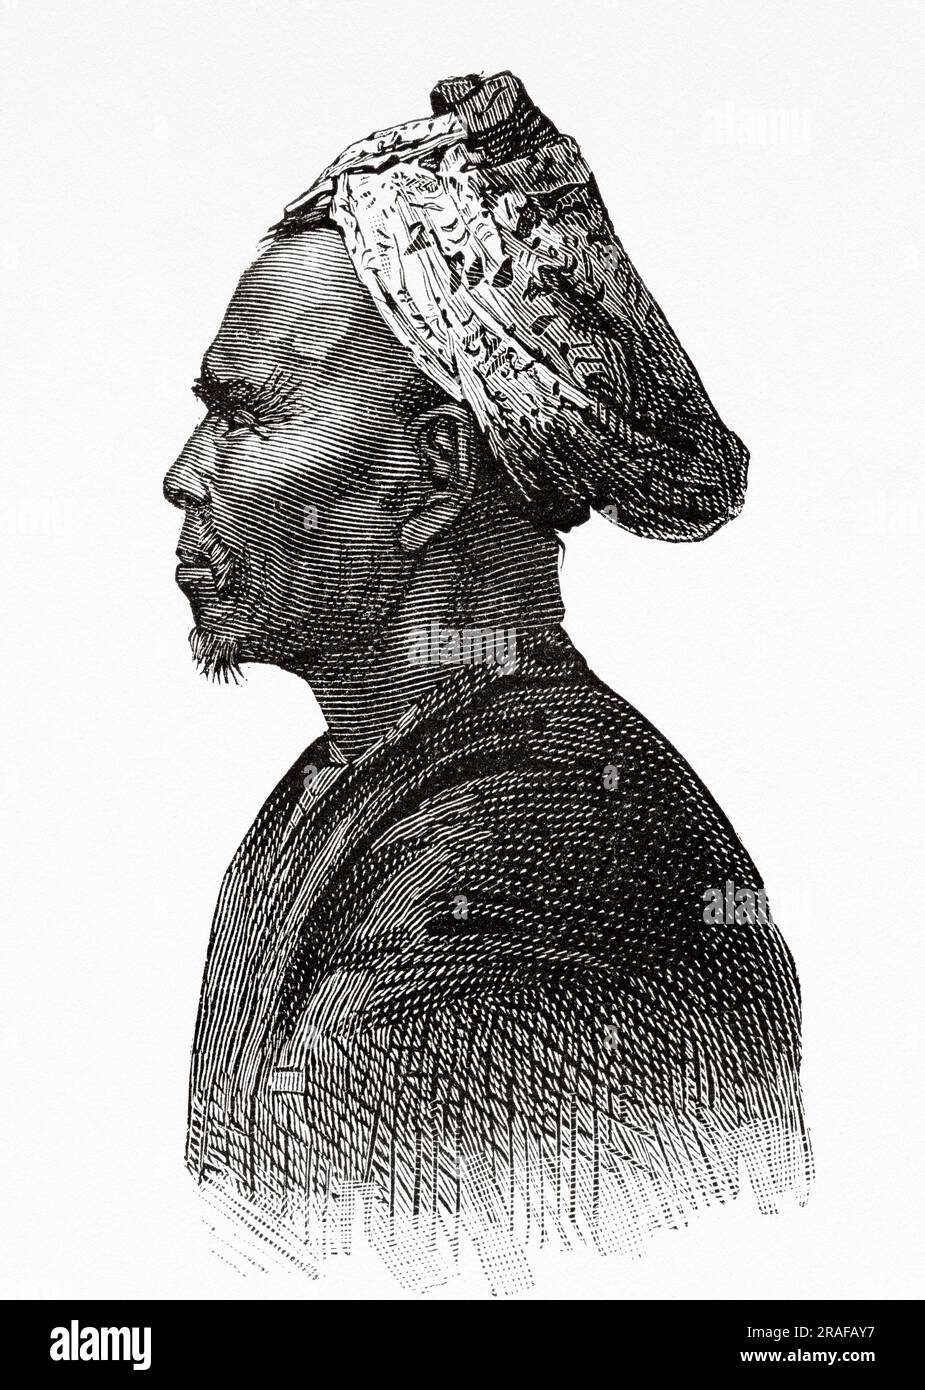 Bugis native man, Borneo. Indonesia. Journey to the Philippines and Malaysia by Dr. J. Montano 1879-1881. Old 19th century engraving from Le Tour du Monde 1906 Stock Photo